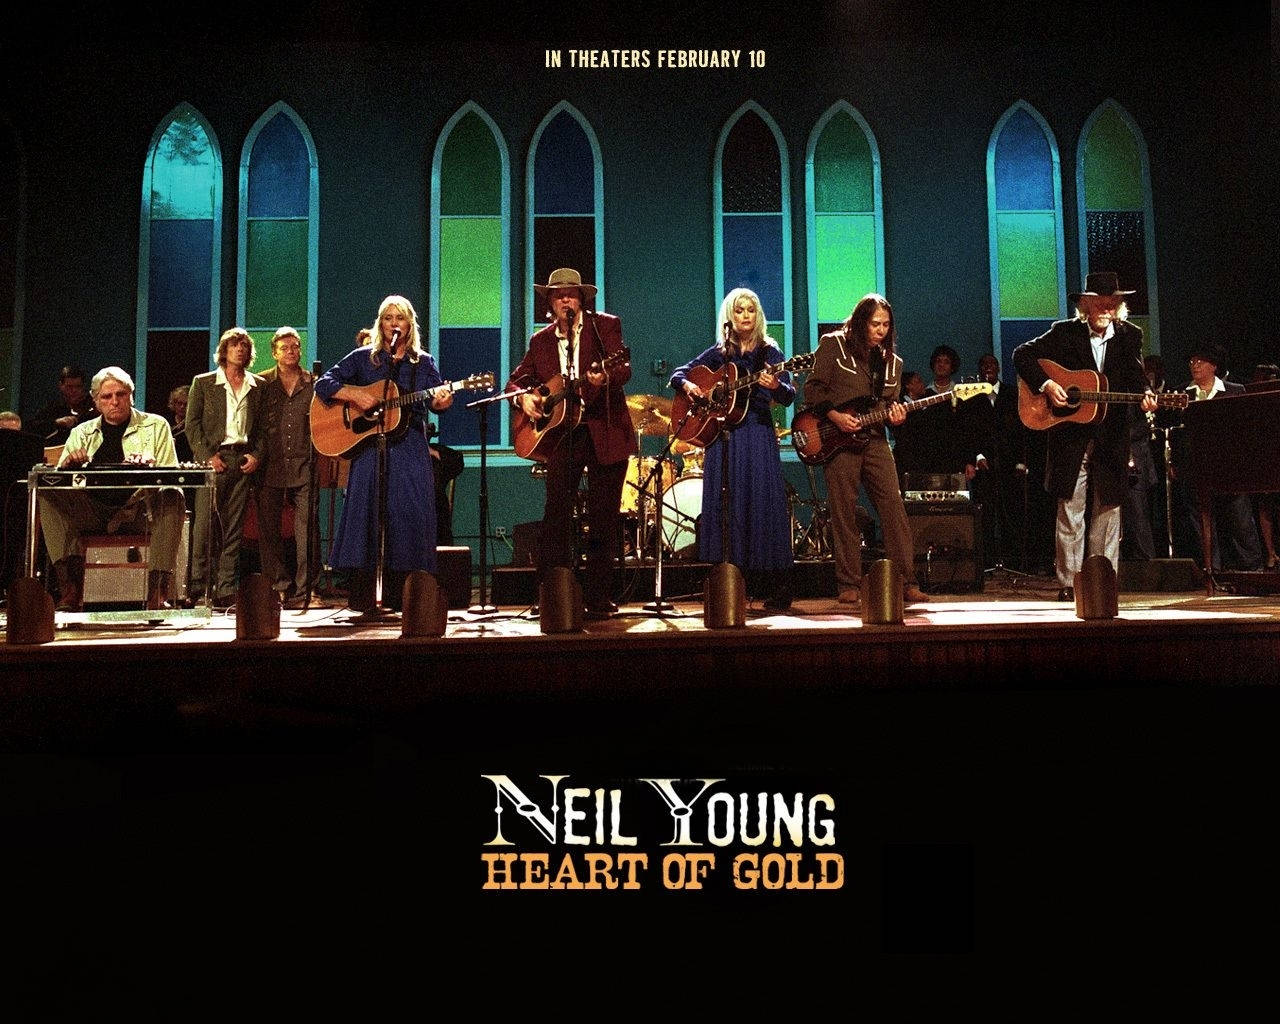 Neil Young Heart Of Gold Concert Film Poster Background